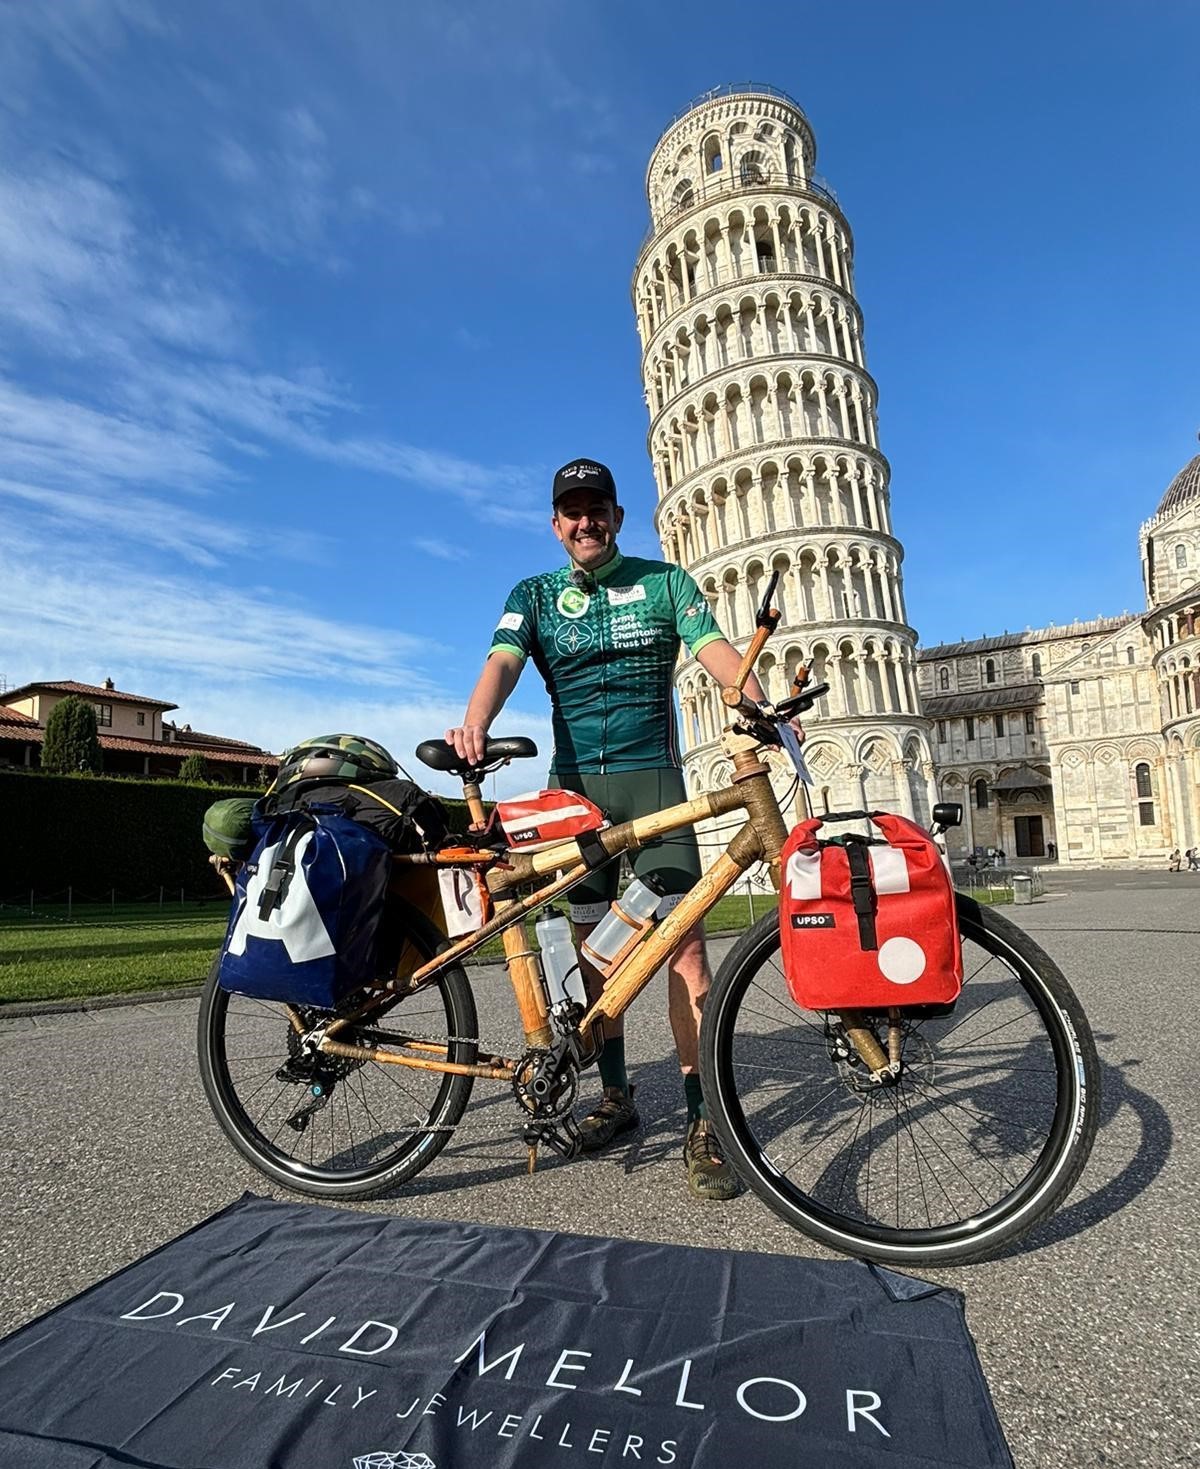 Cyclist in front of Leaning Tower of Pisa